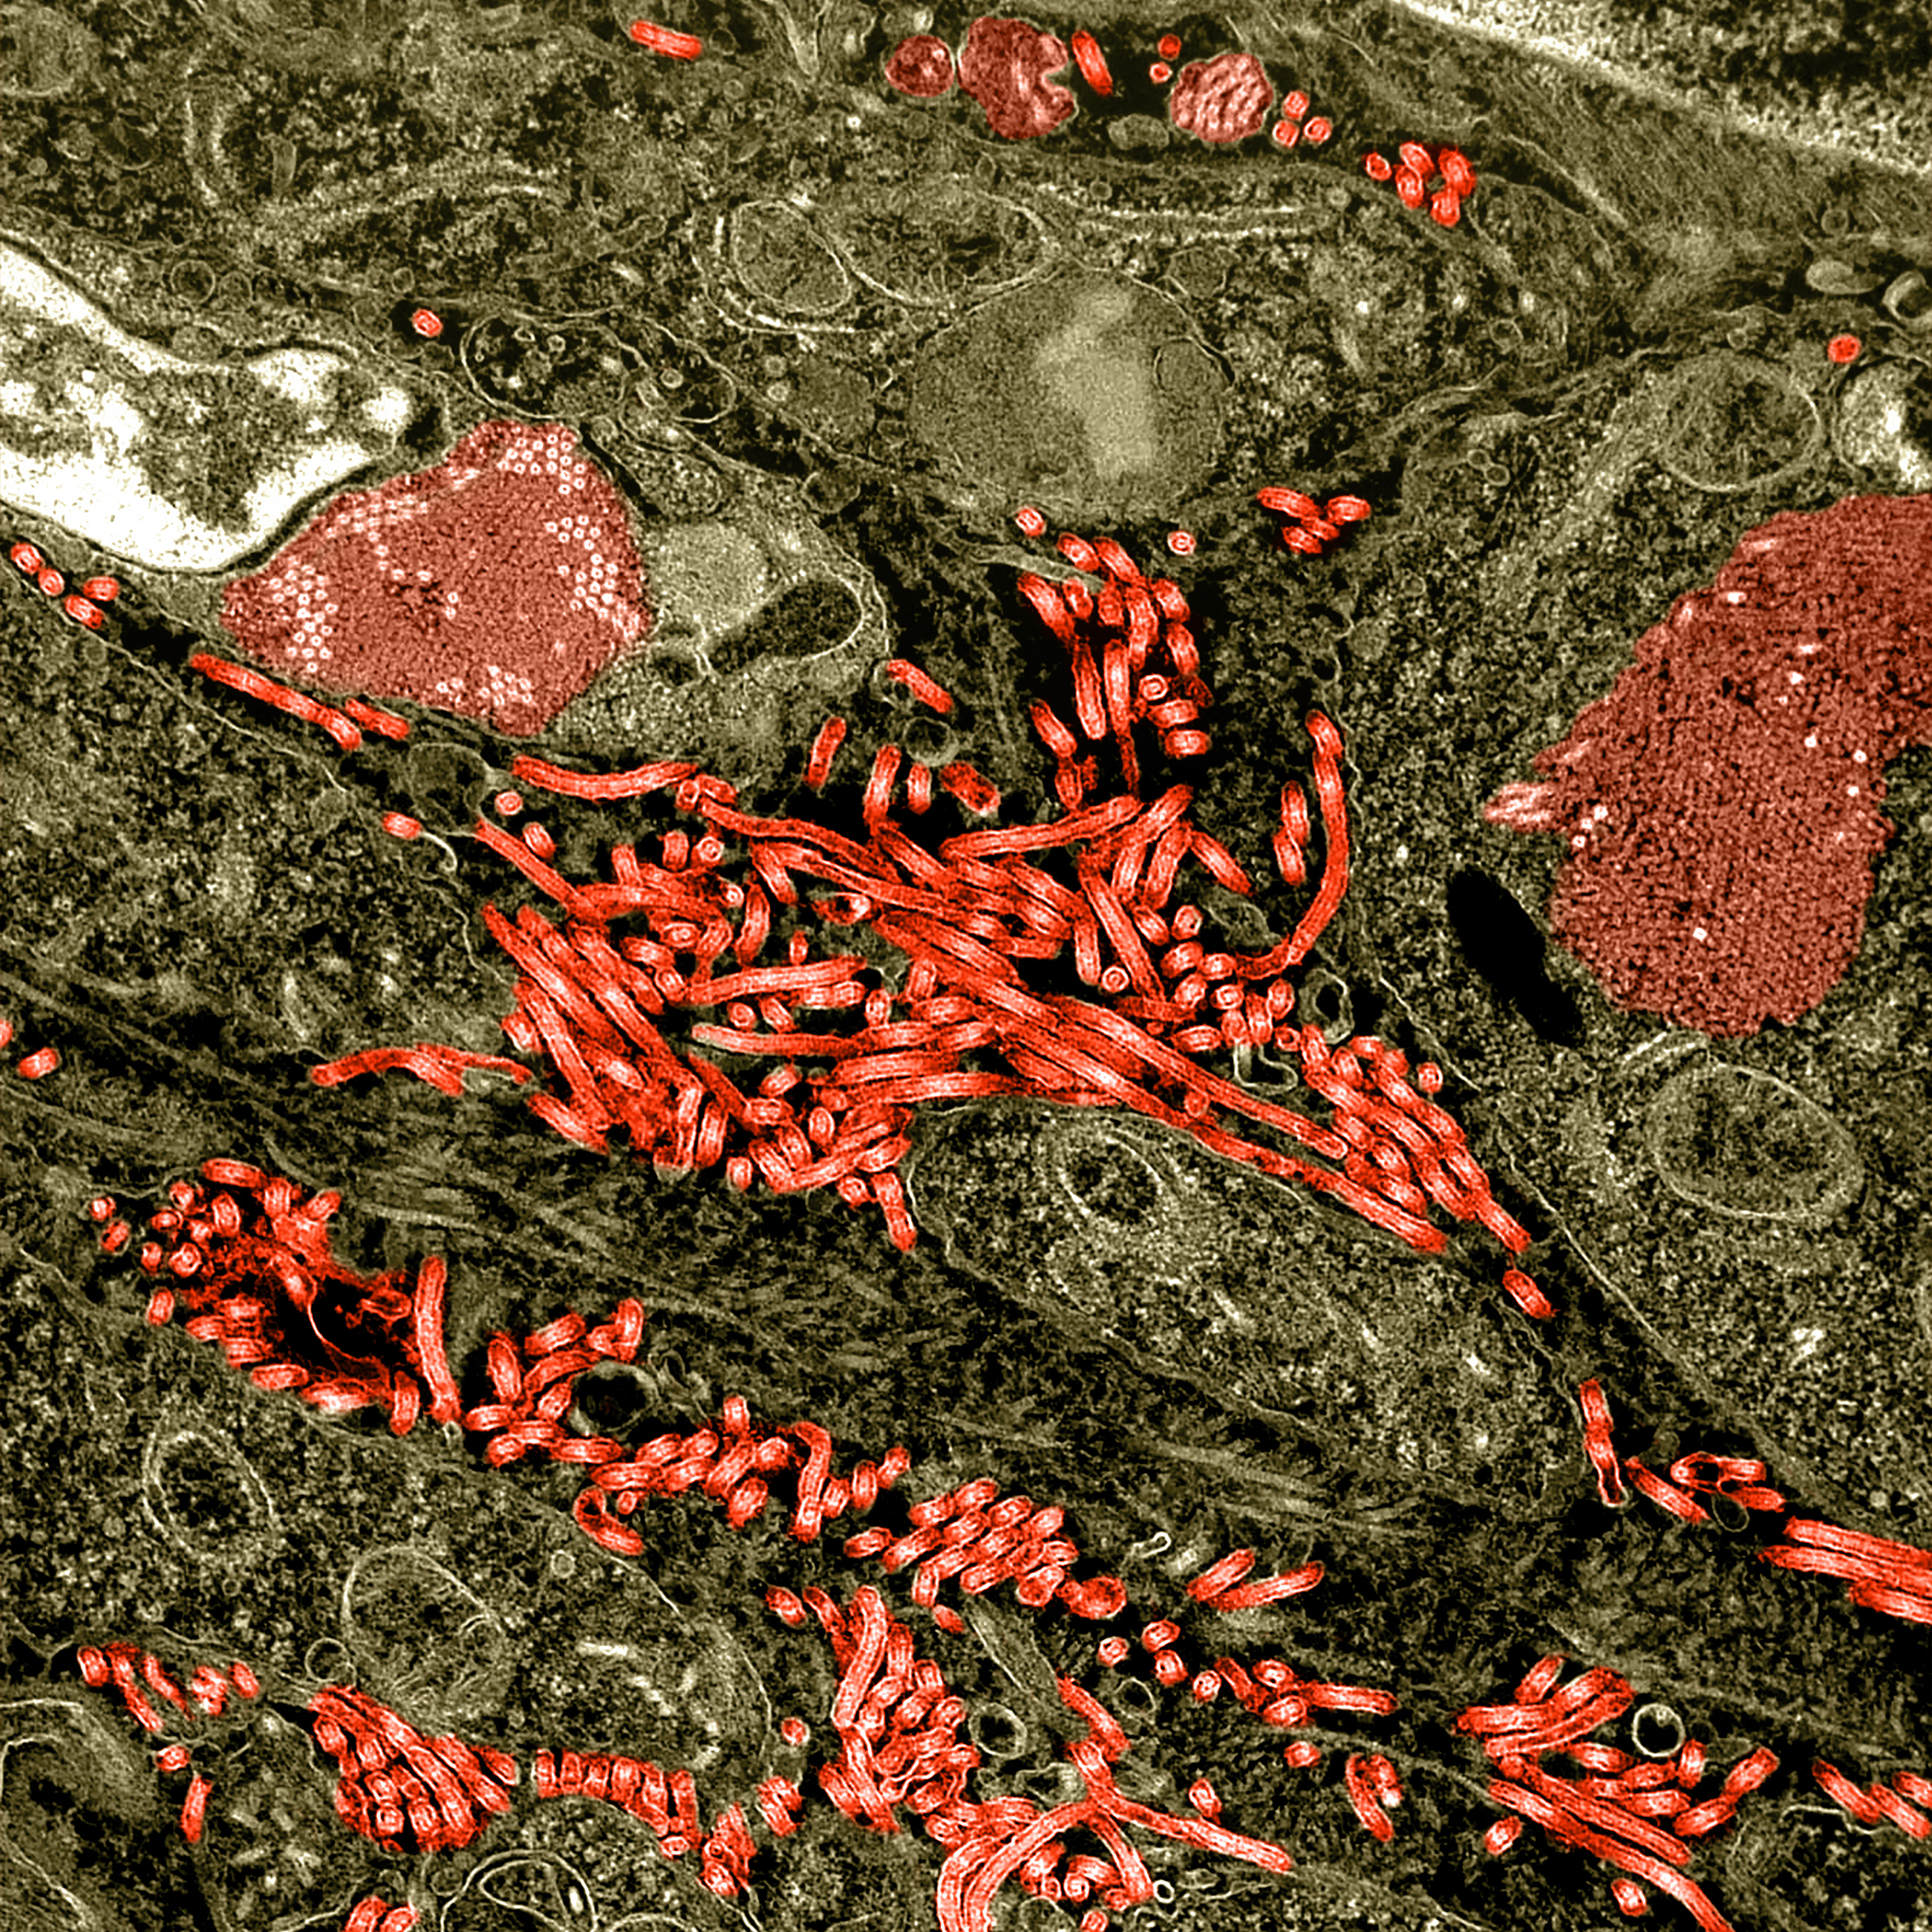 Colorized transmission electron micrograph of the ovary from a nonhuman primate infected with Ebola virus.